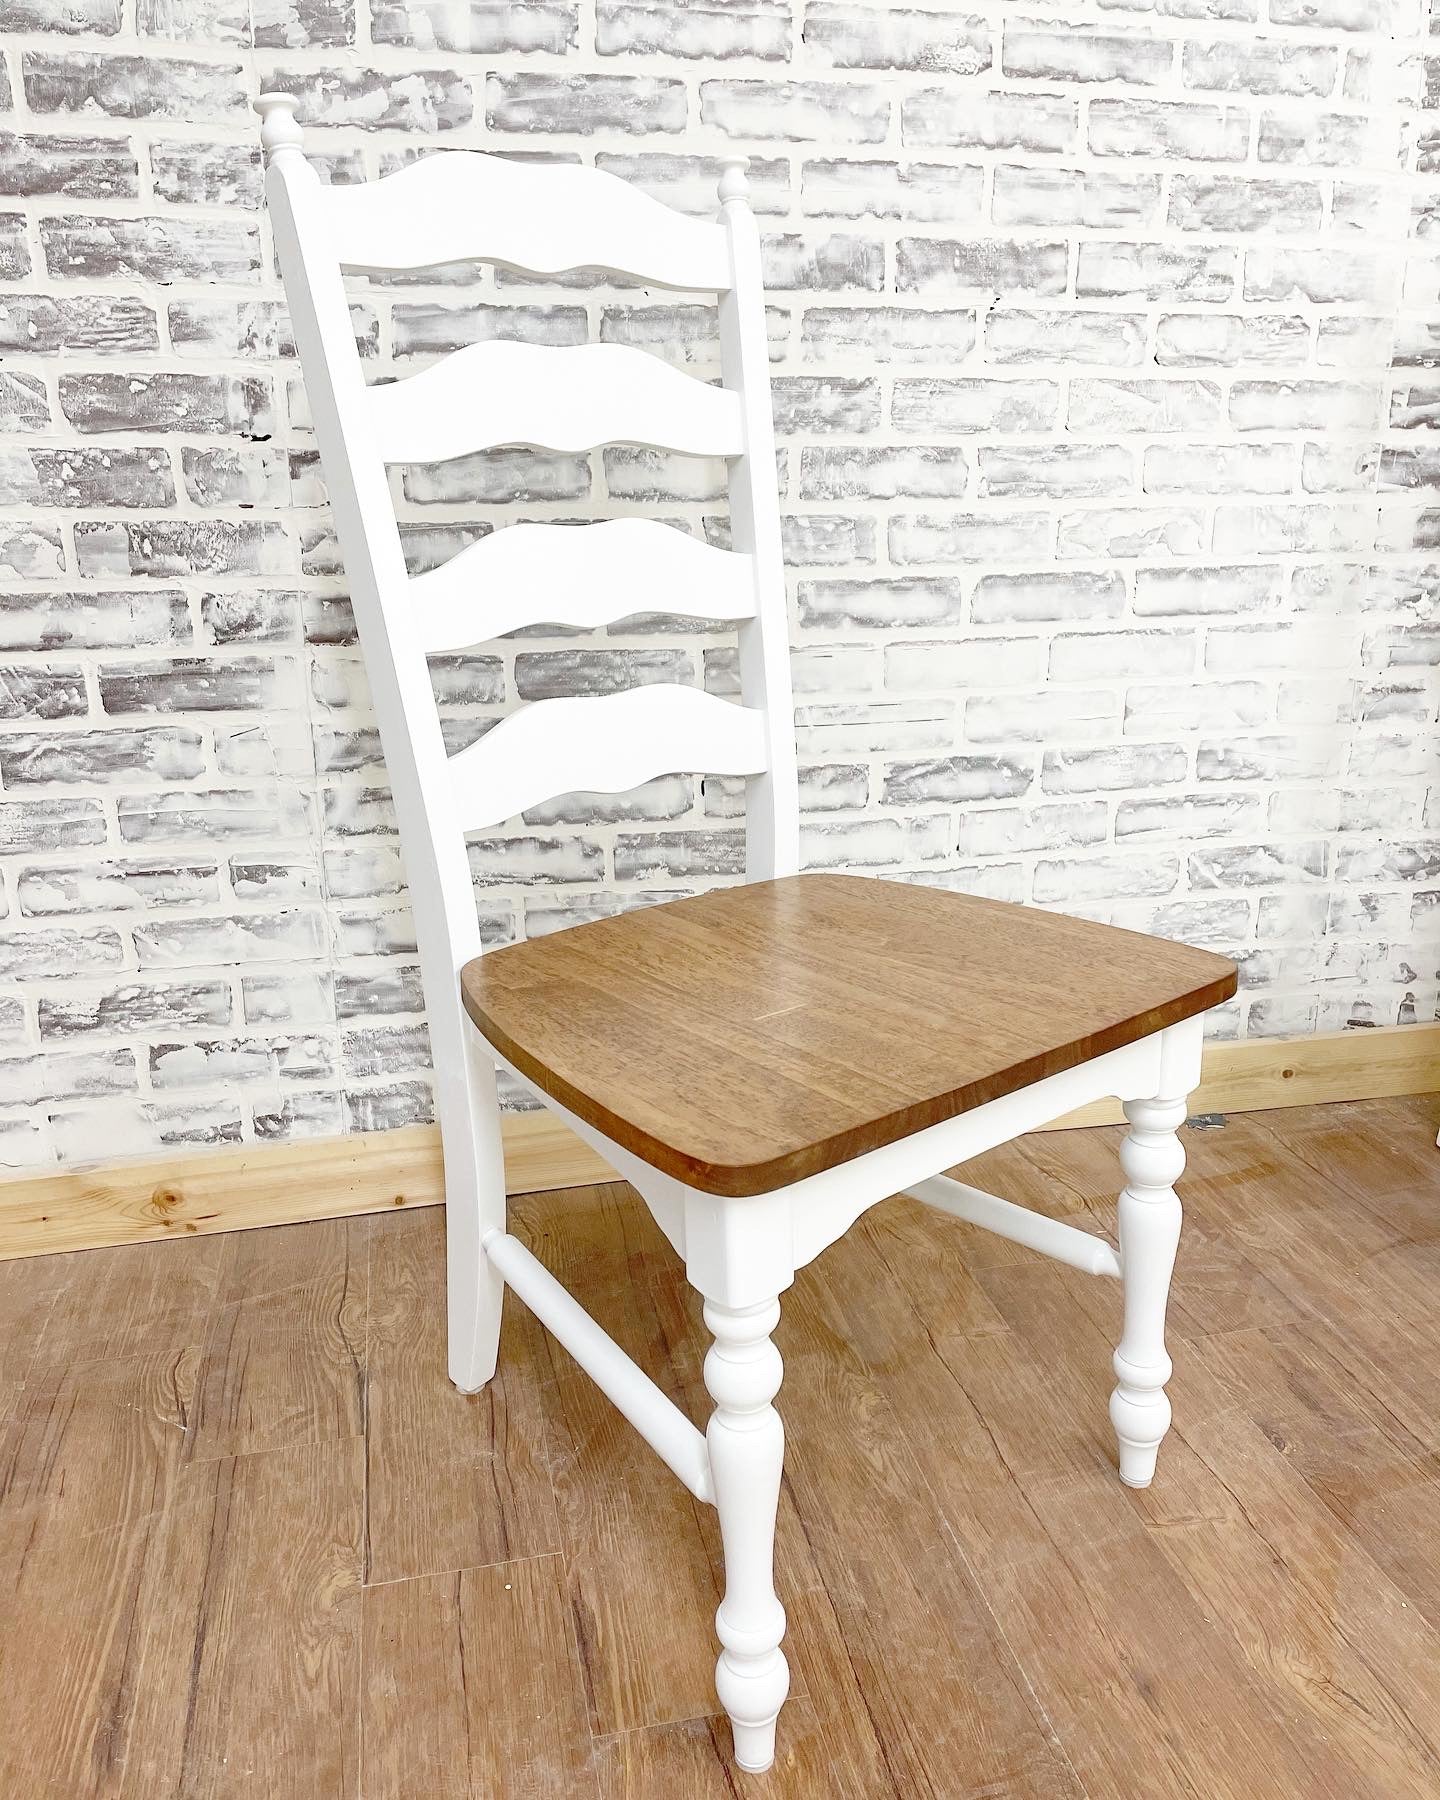 Maine Ladder Back Chair painted White with Early American stained seat.